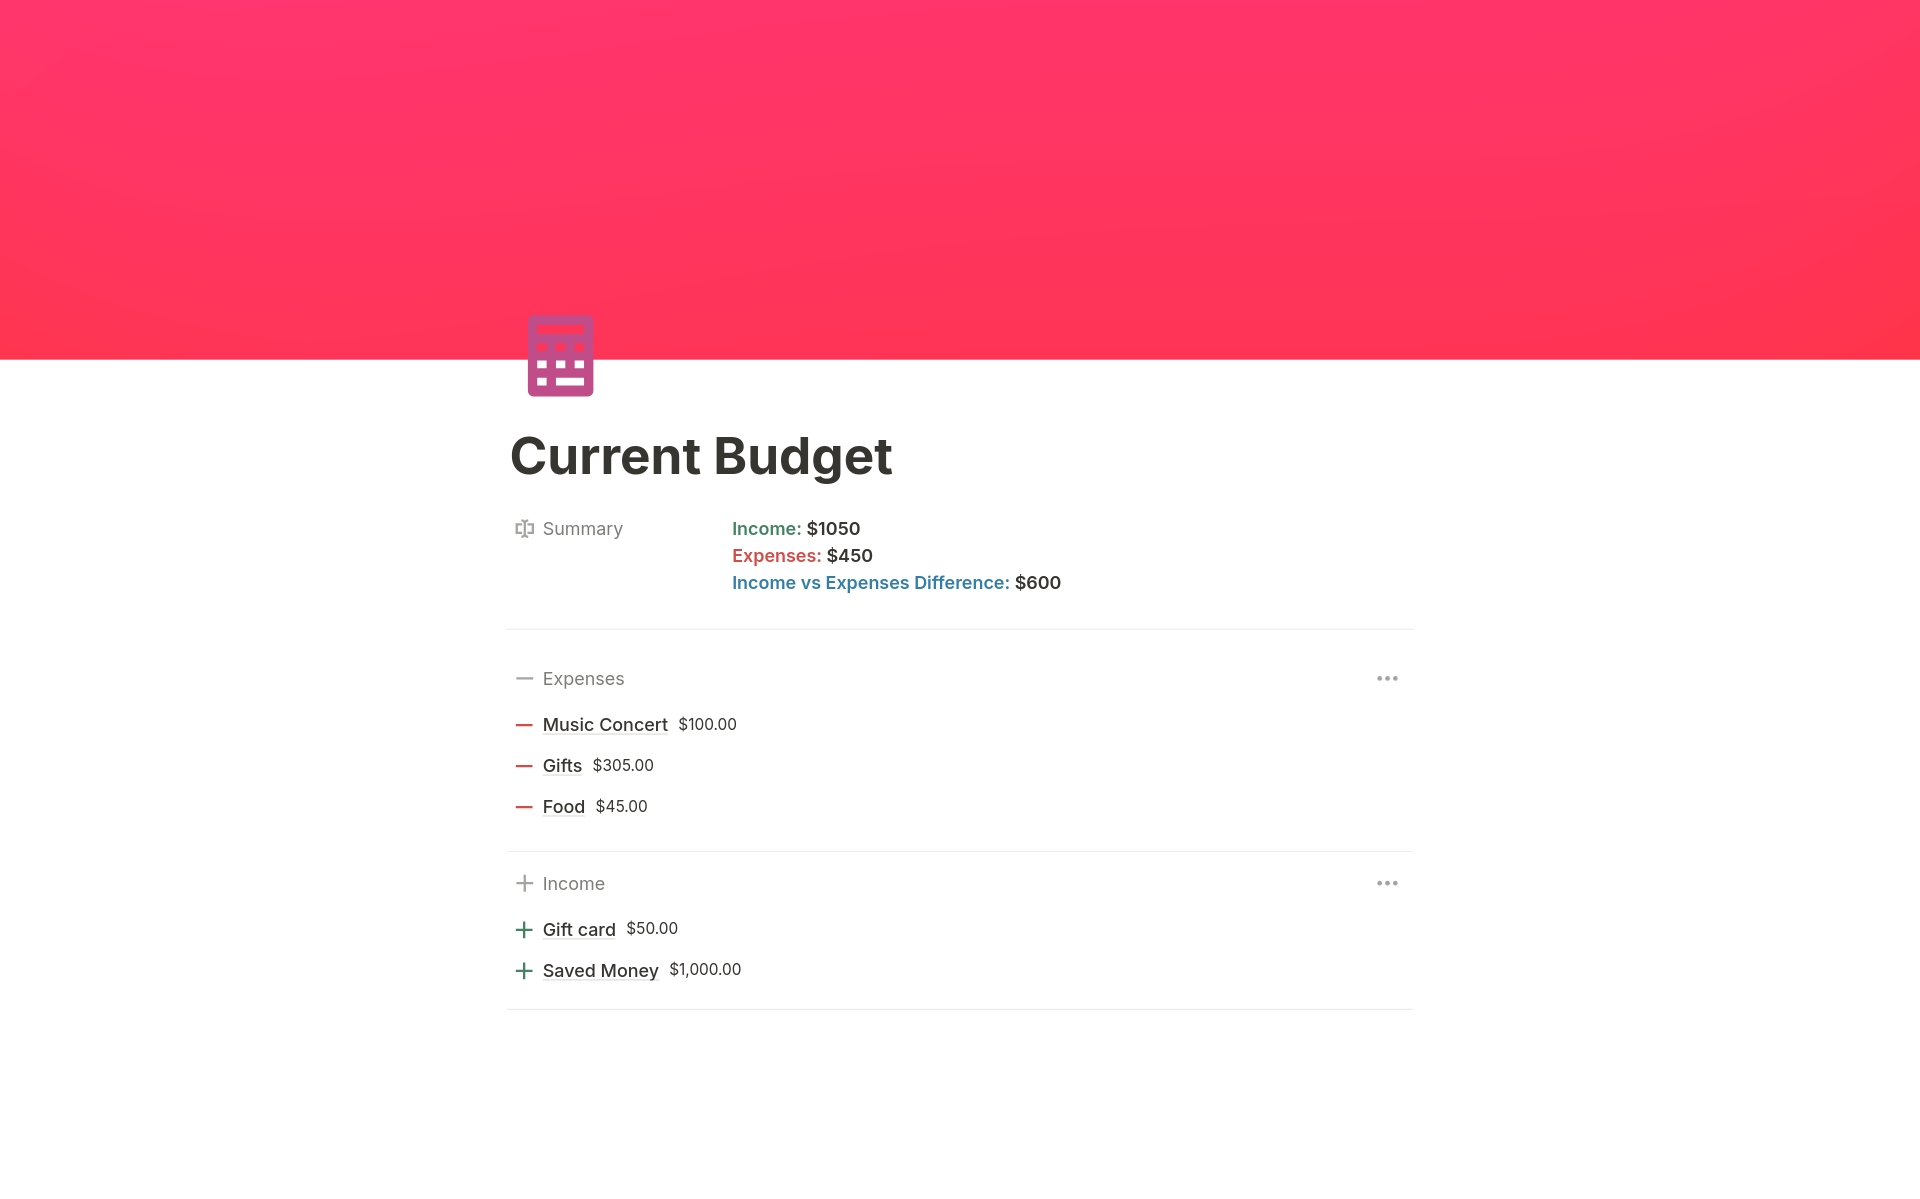 The "Simple Financial Dashboard" template is a tool for financial management. It provides an overview of your finances, including income, expenses, and net cash flow. Also, is a good start to use Notion and use Notion formulas in simple steps